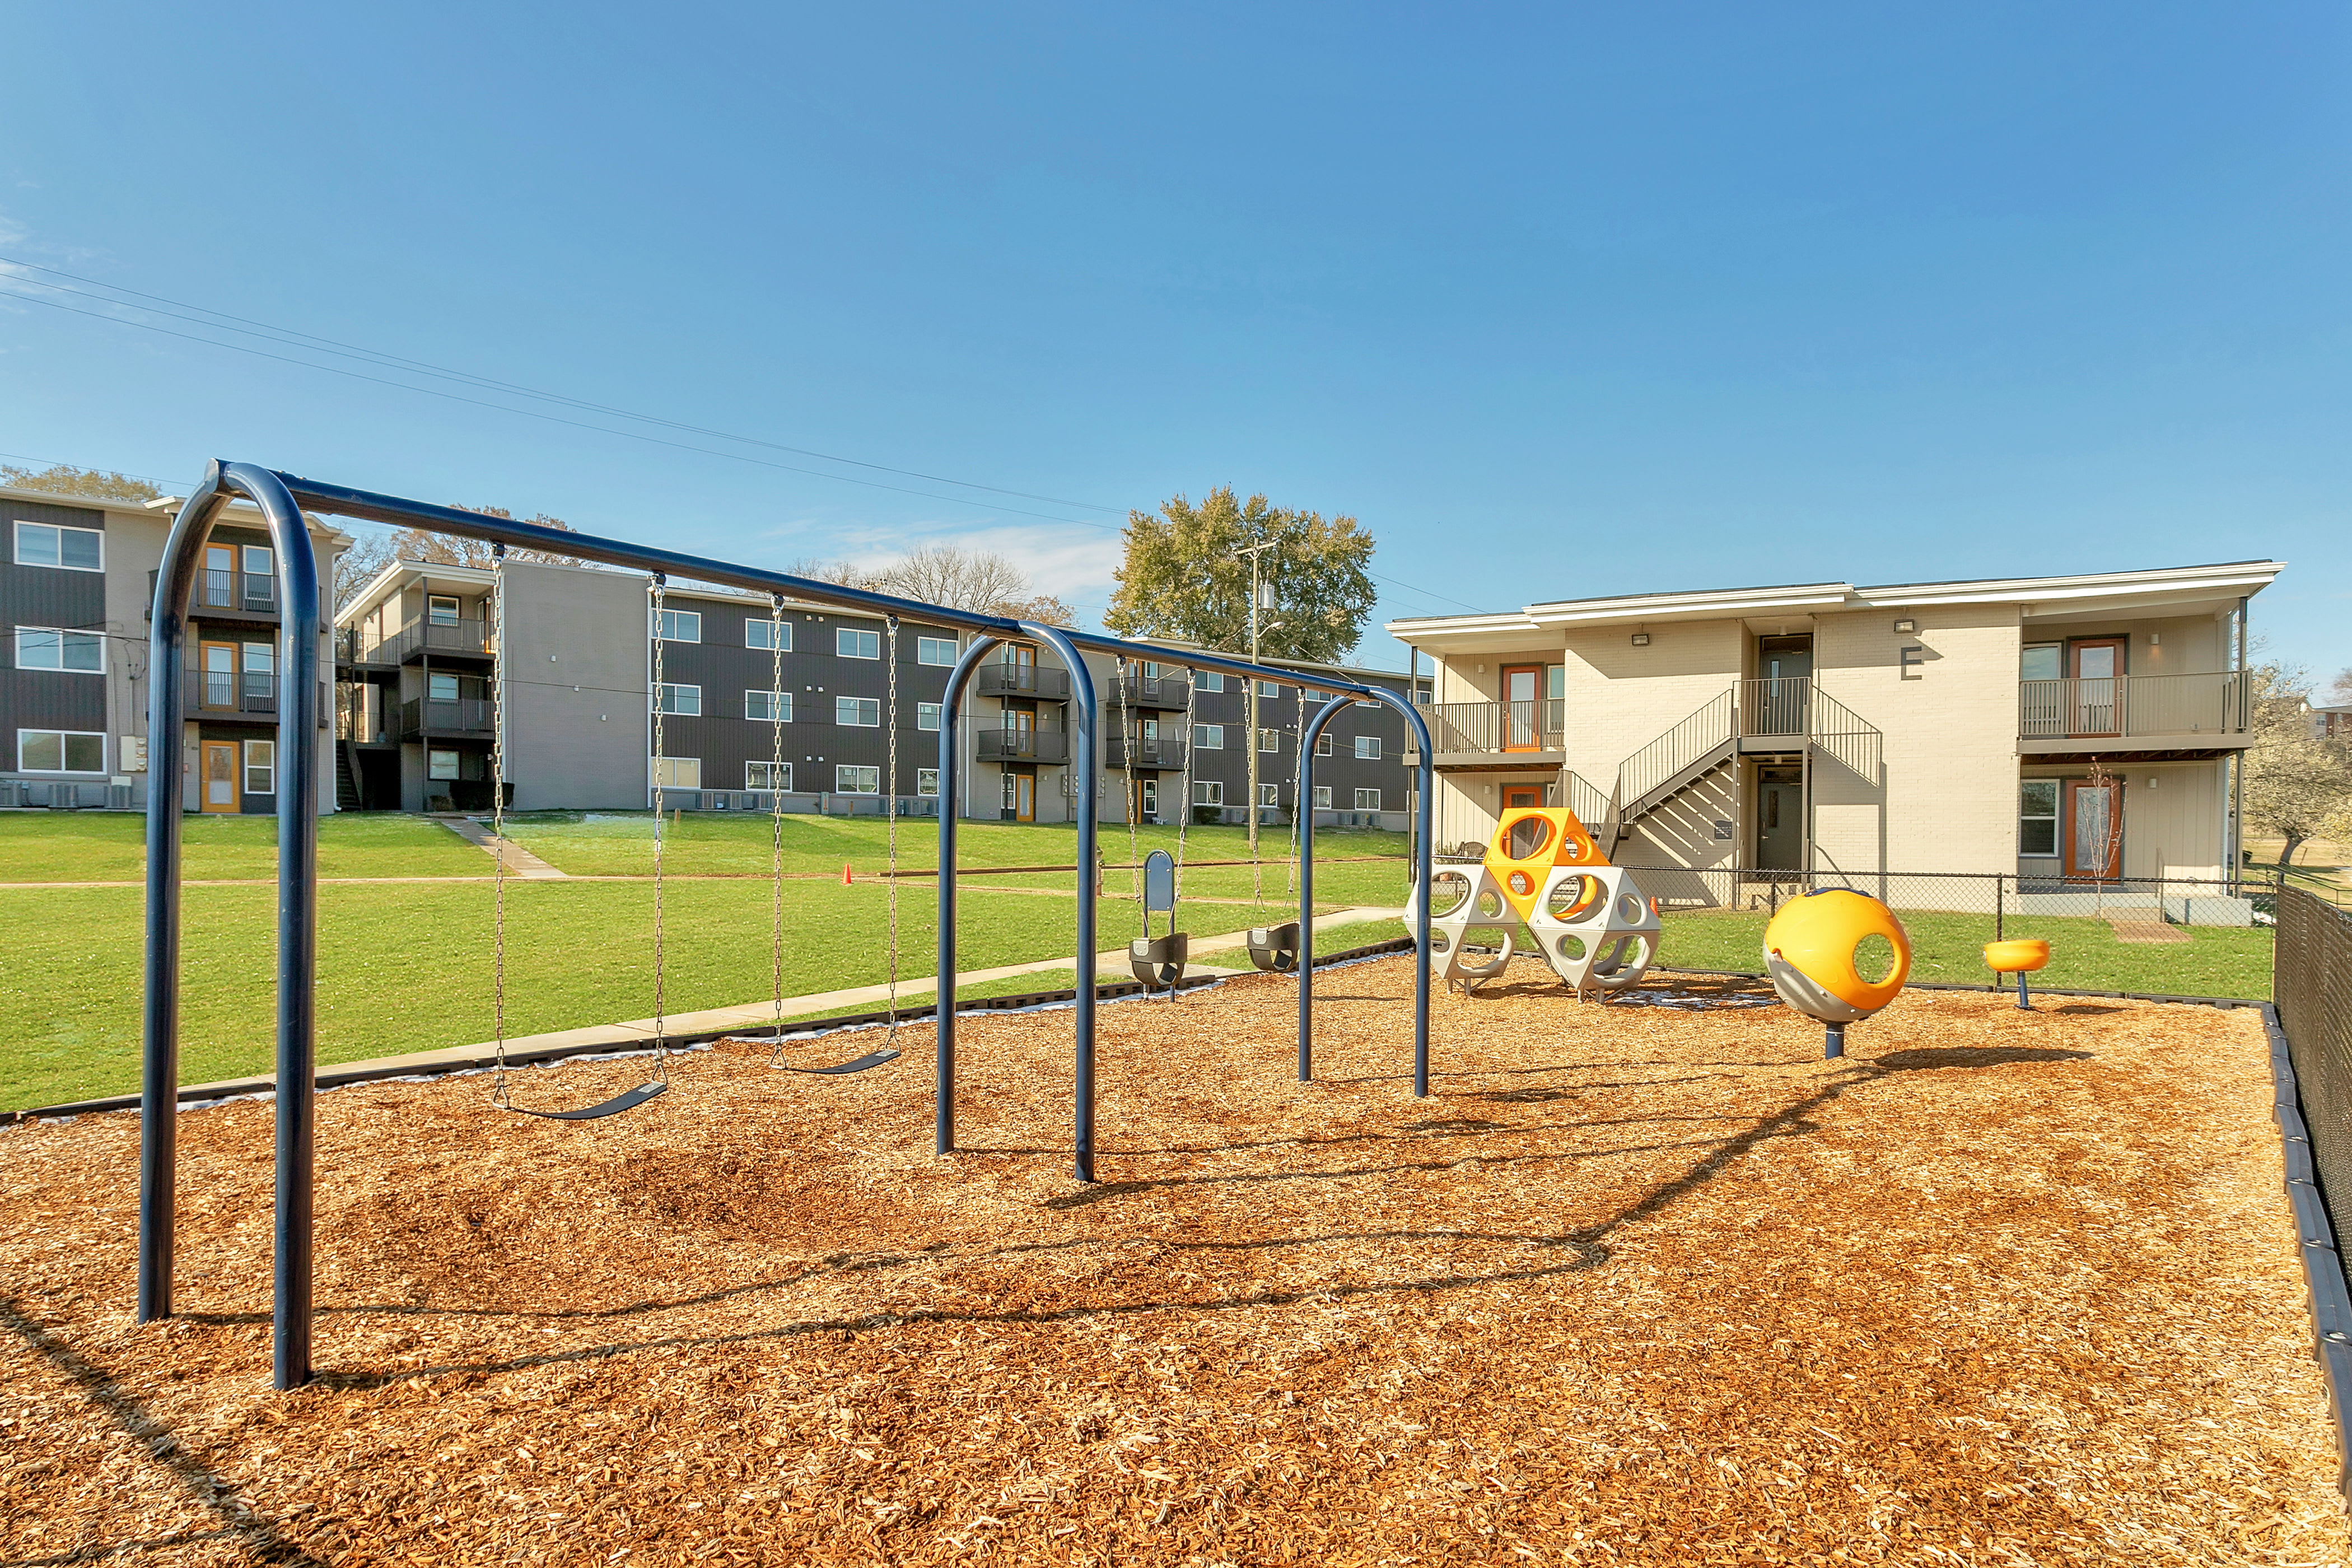 Large playground for children at Gibson Creek Apartments in Madison, Tennessee